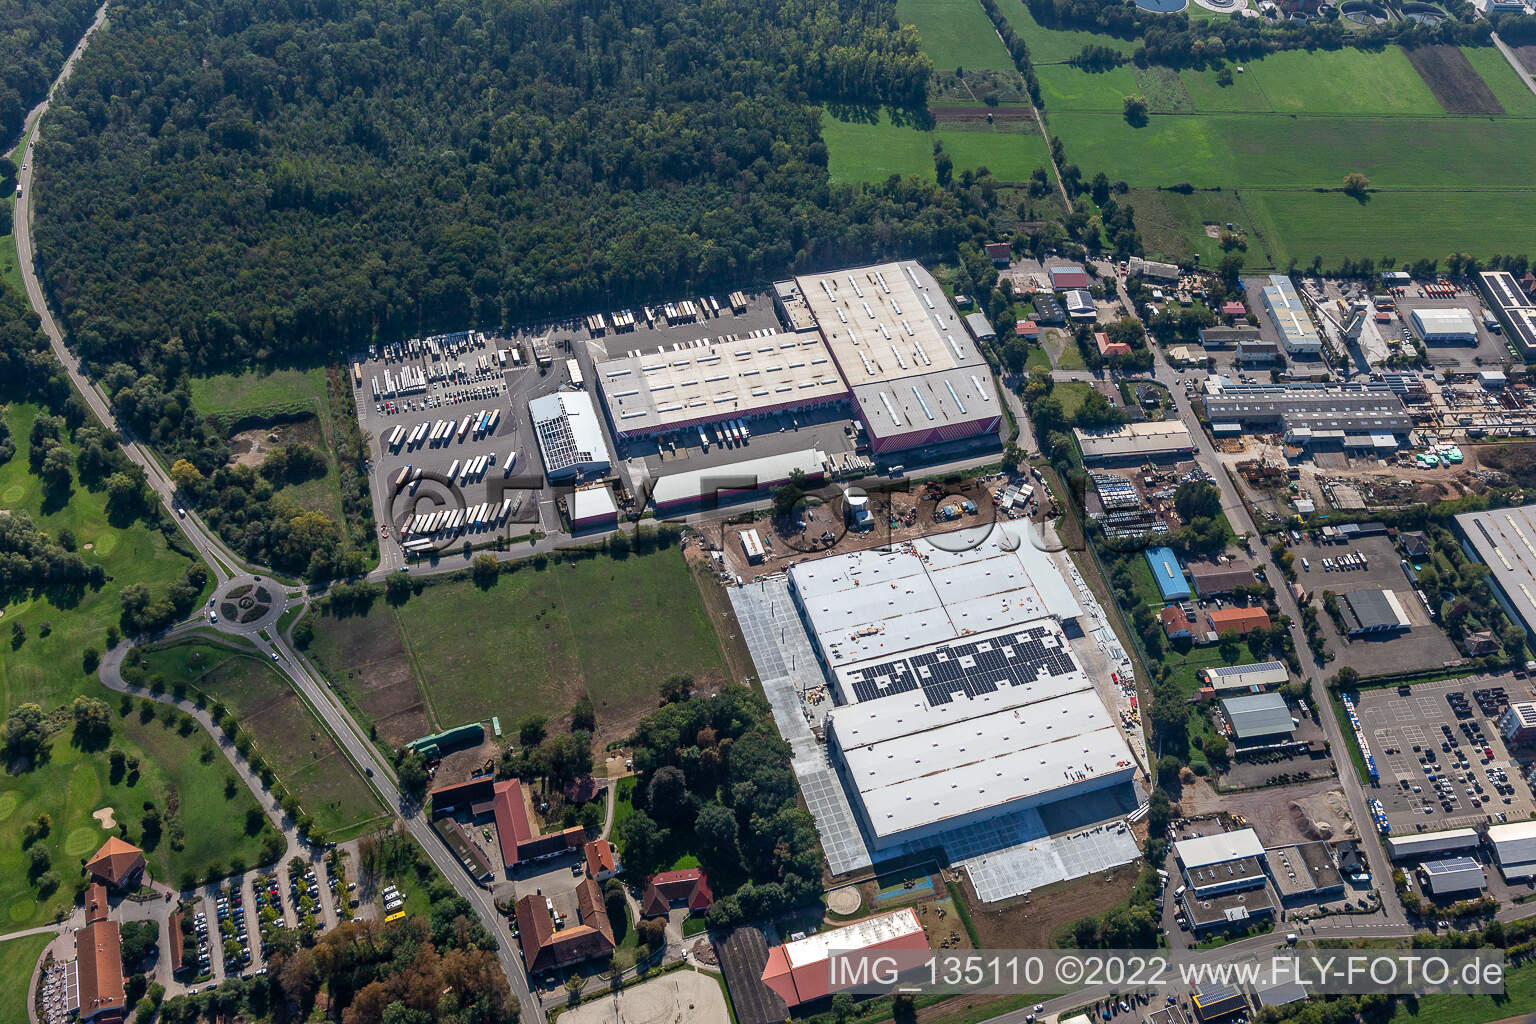 Aerial view of Hornbach central warehouse expansion in Essingen in the state Rhineland-Palatinate, Germany